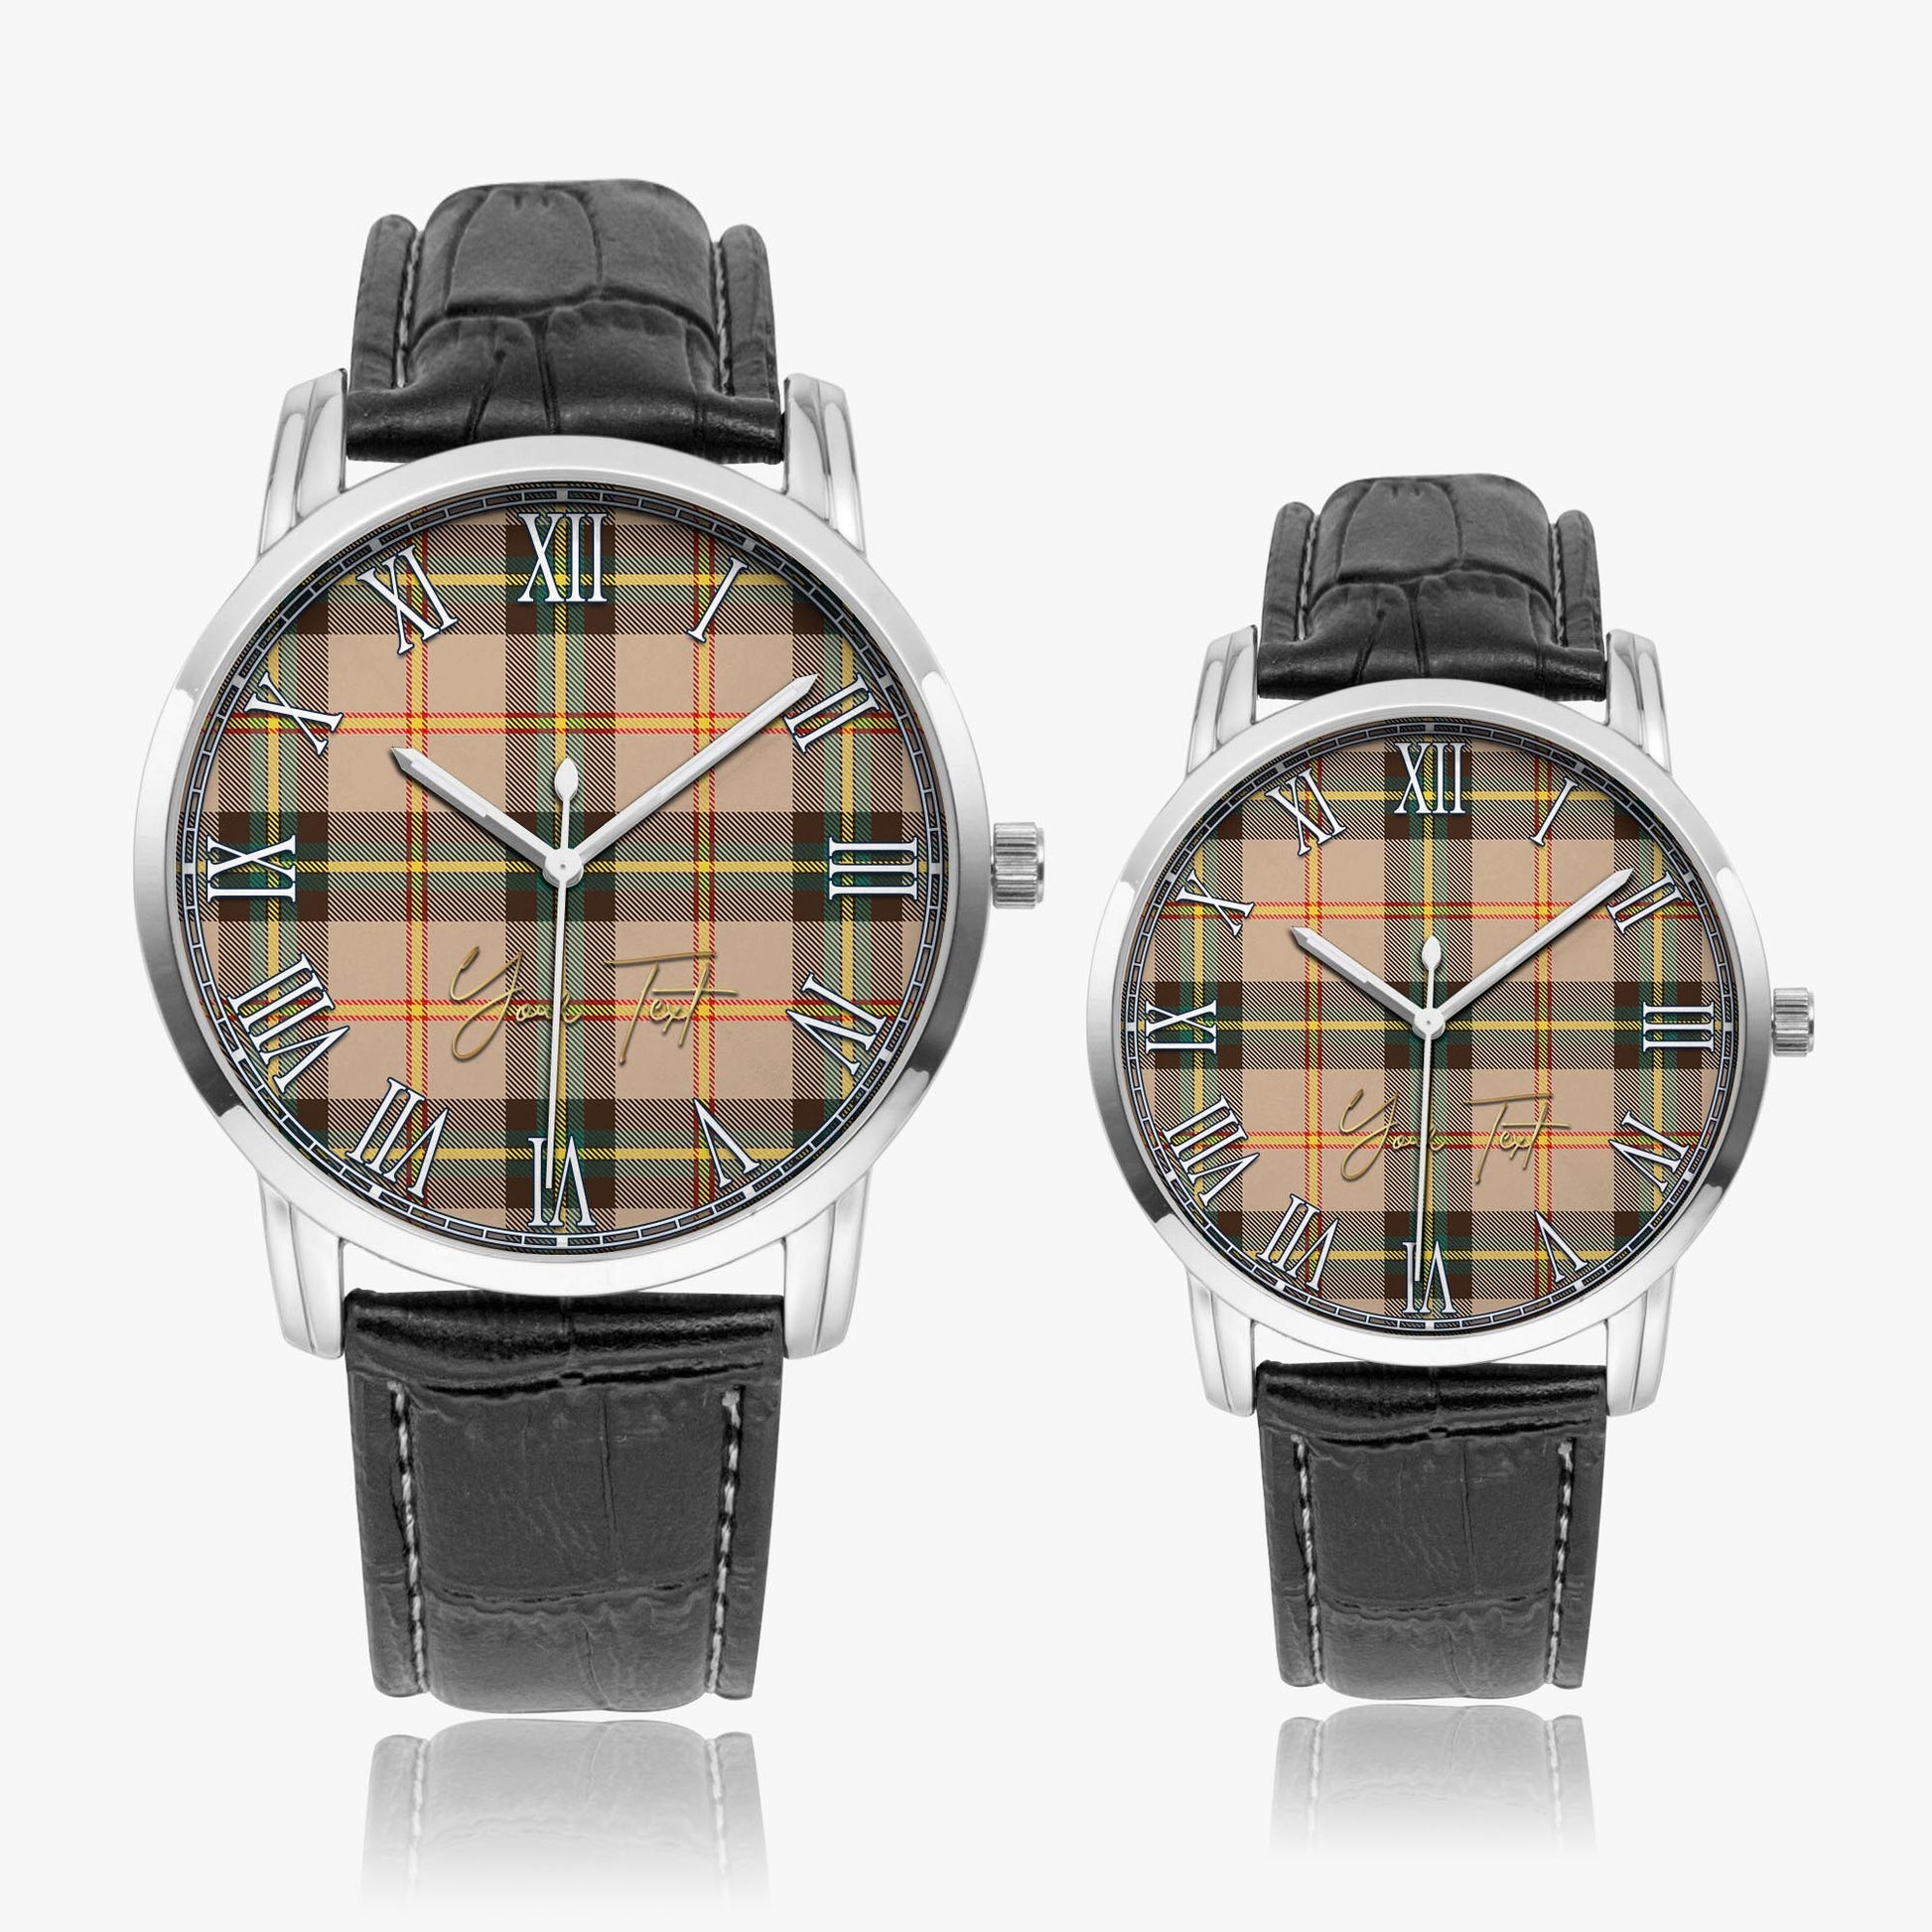 Saskatchewan Province Canada Tartan Personalized Your Text Leather Trap Quartz Watch Wide Type Silver Case With Black Leather Strap - Tartanvibesclothing